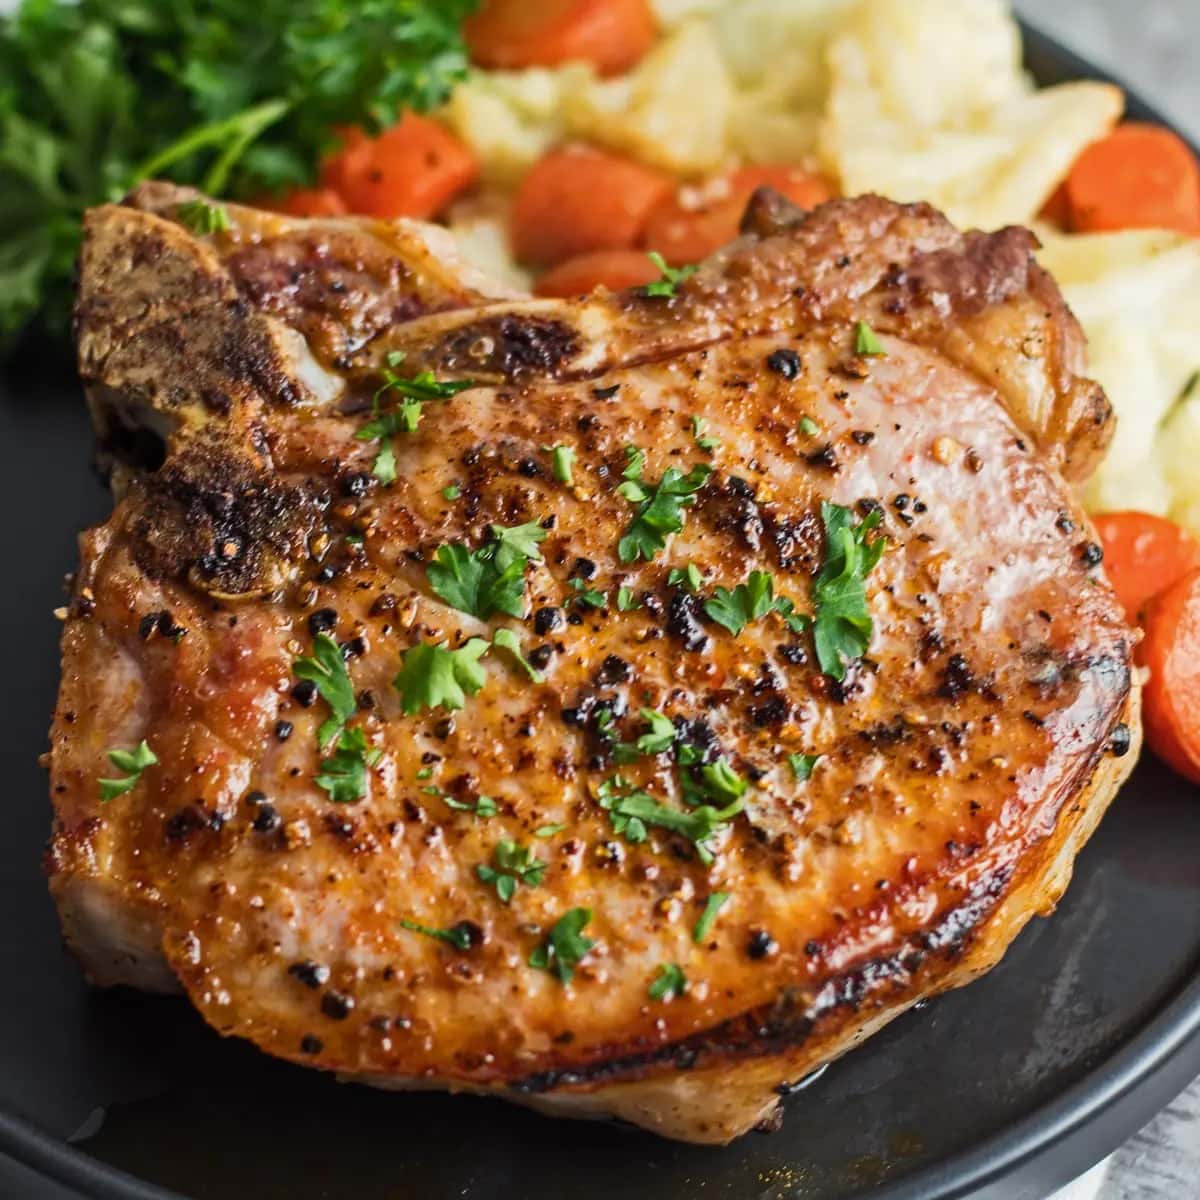 Seasoned with spices and herbs pork chops served with mashed potatoes and carrots. 